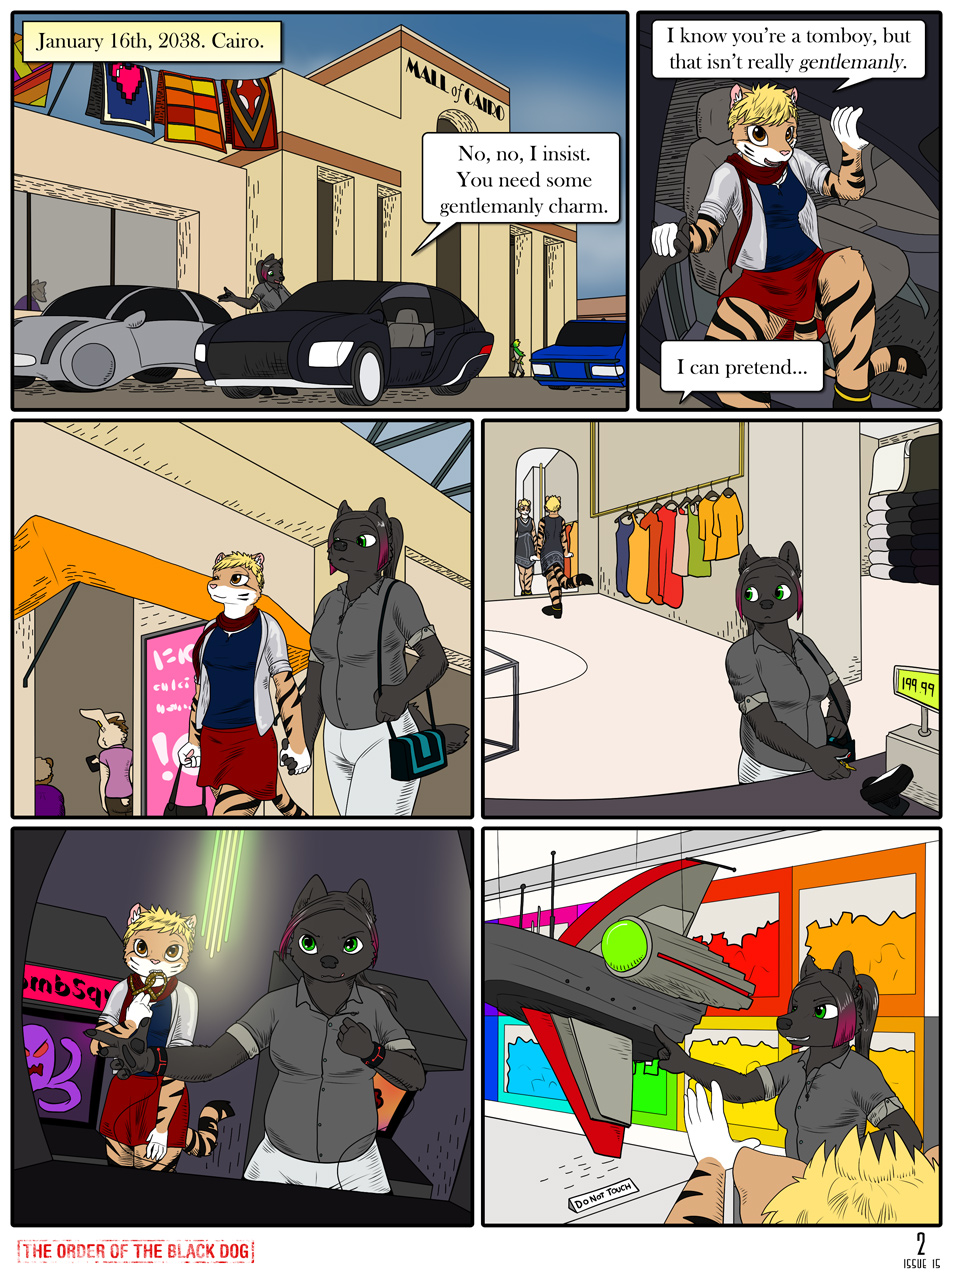 Issue 15, Page 2